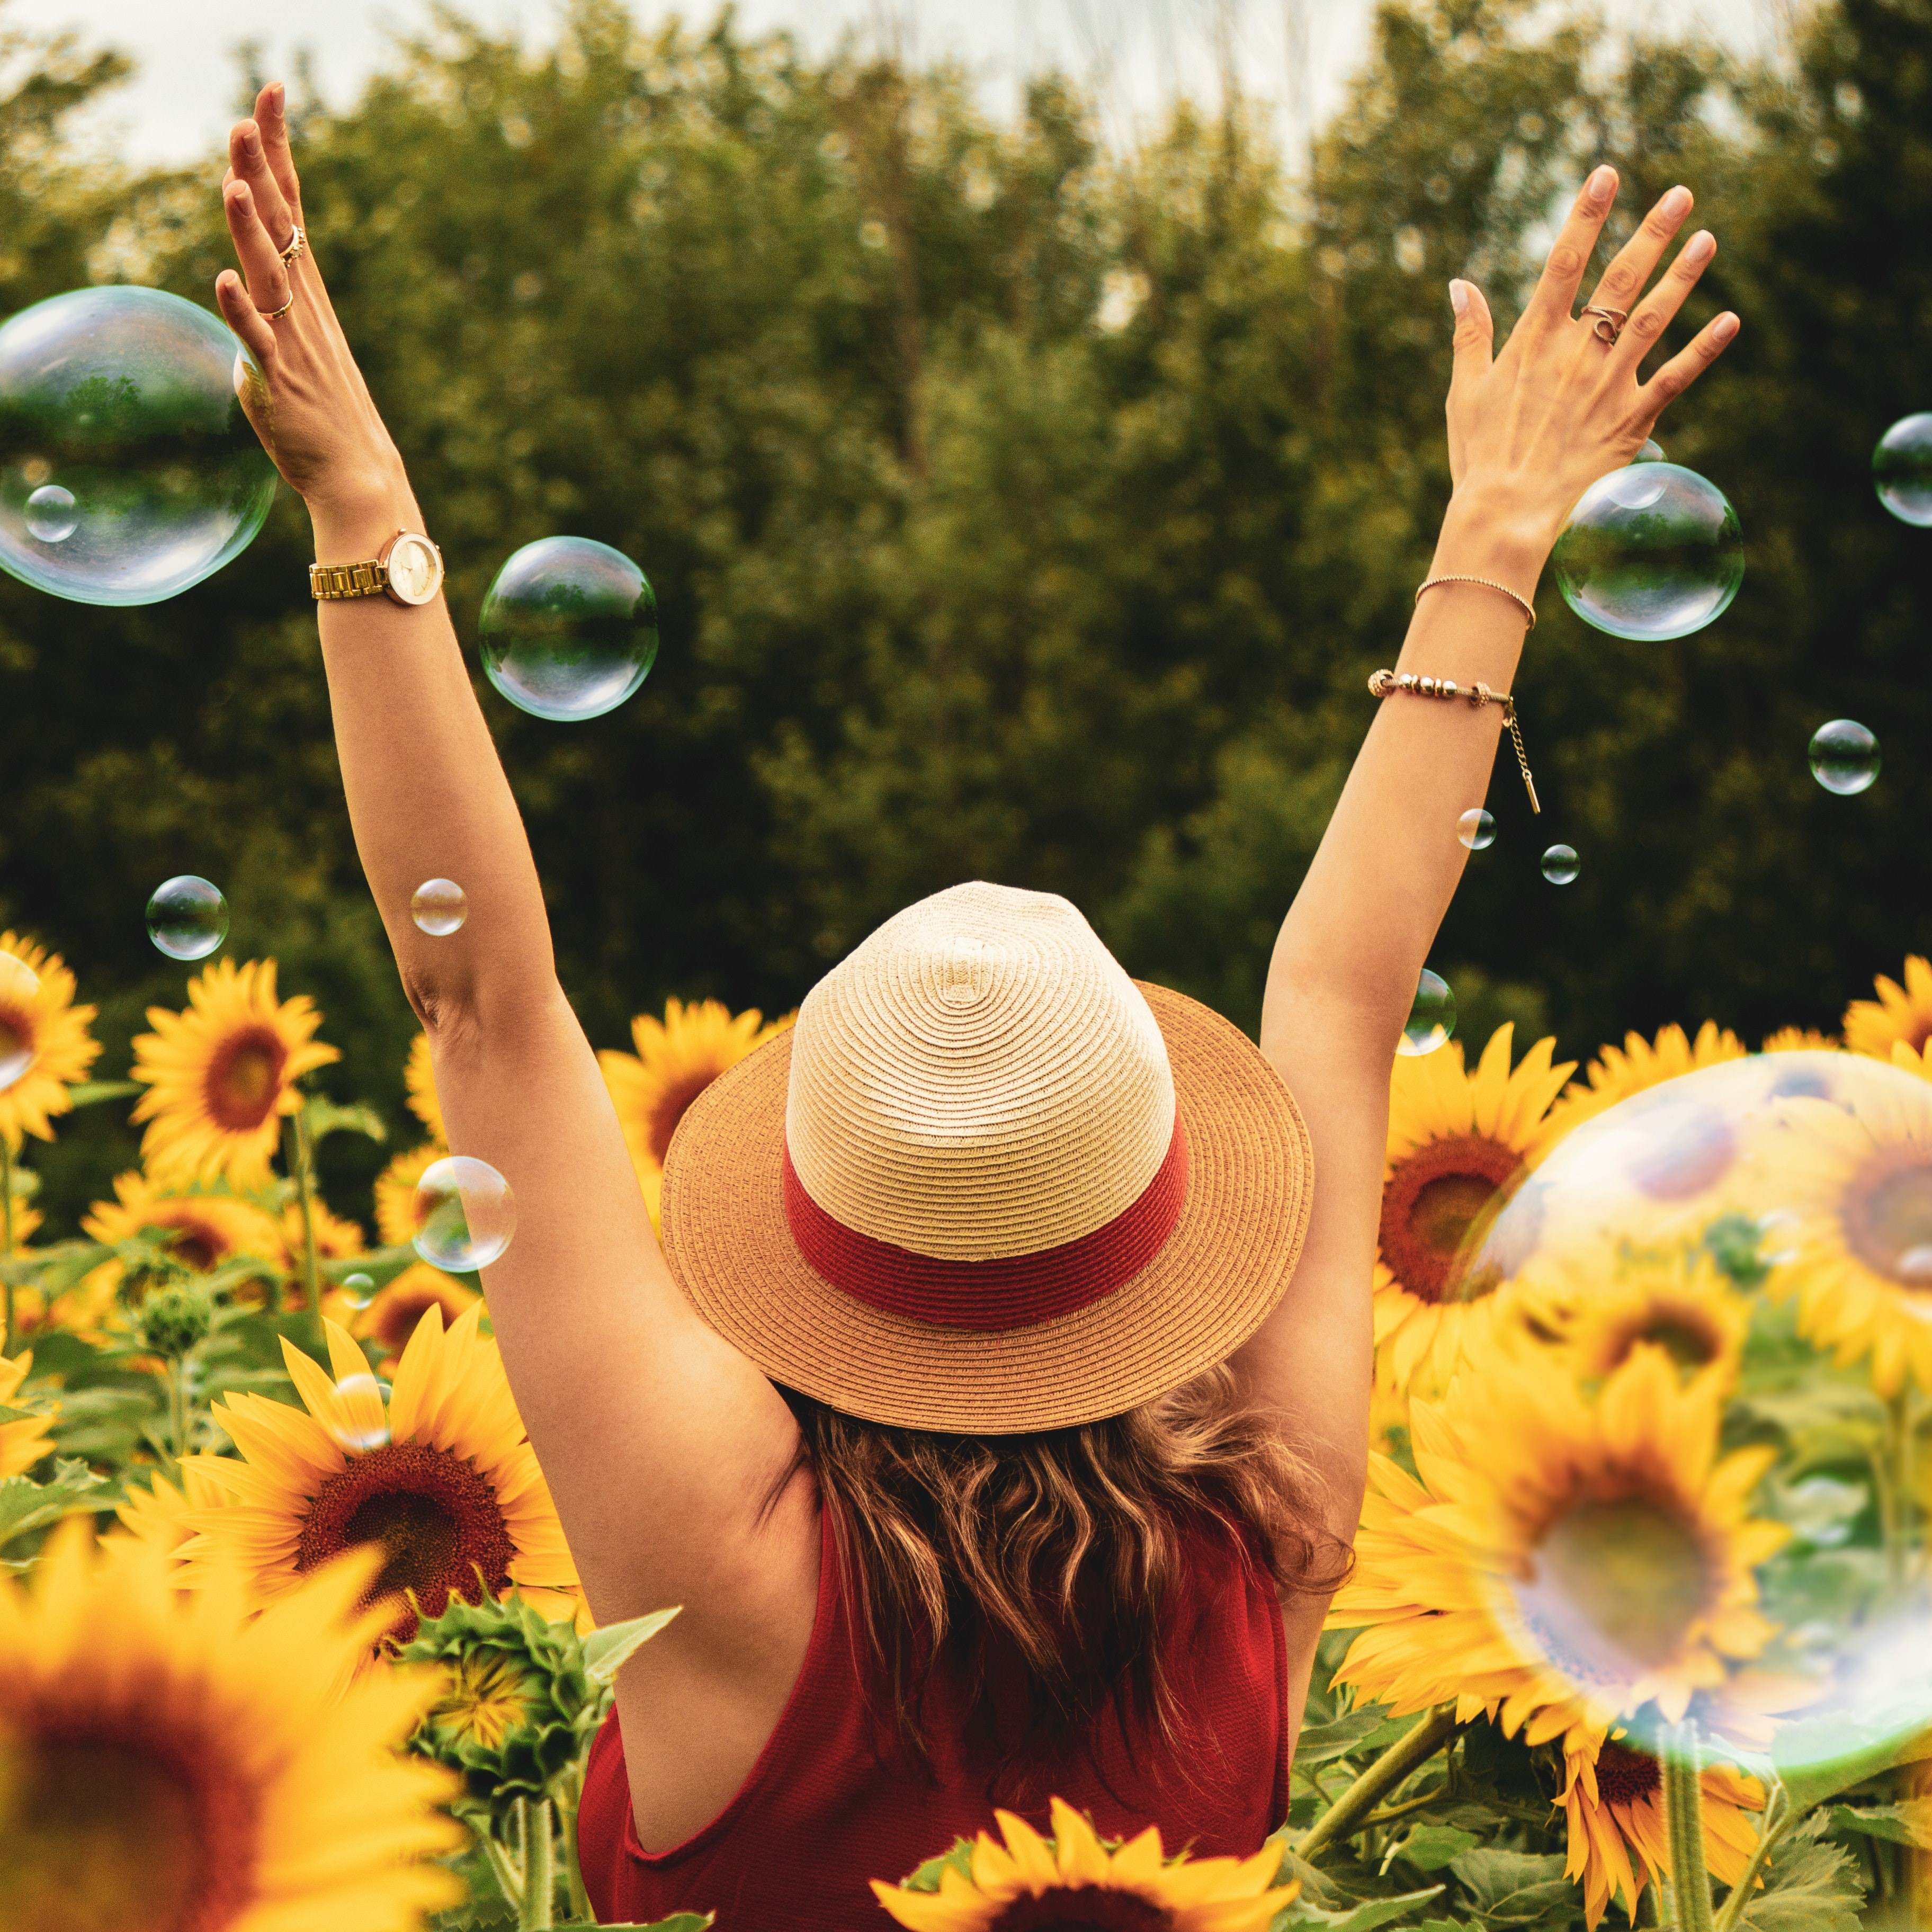 https://www.cassioprof.com/blogue/photography-of-woman-surrounded-by-sunflowers-1263986.jpg